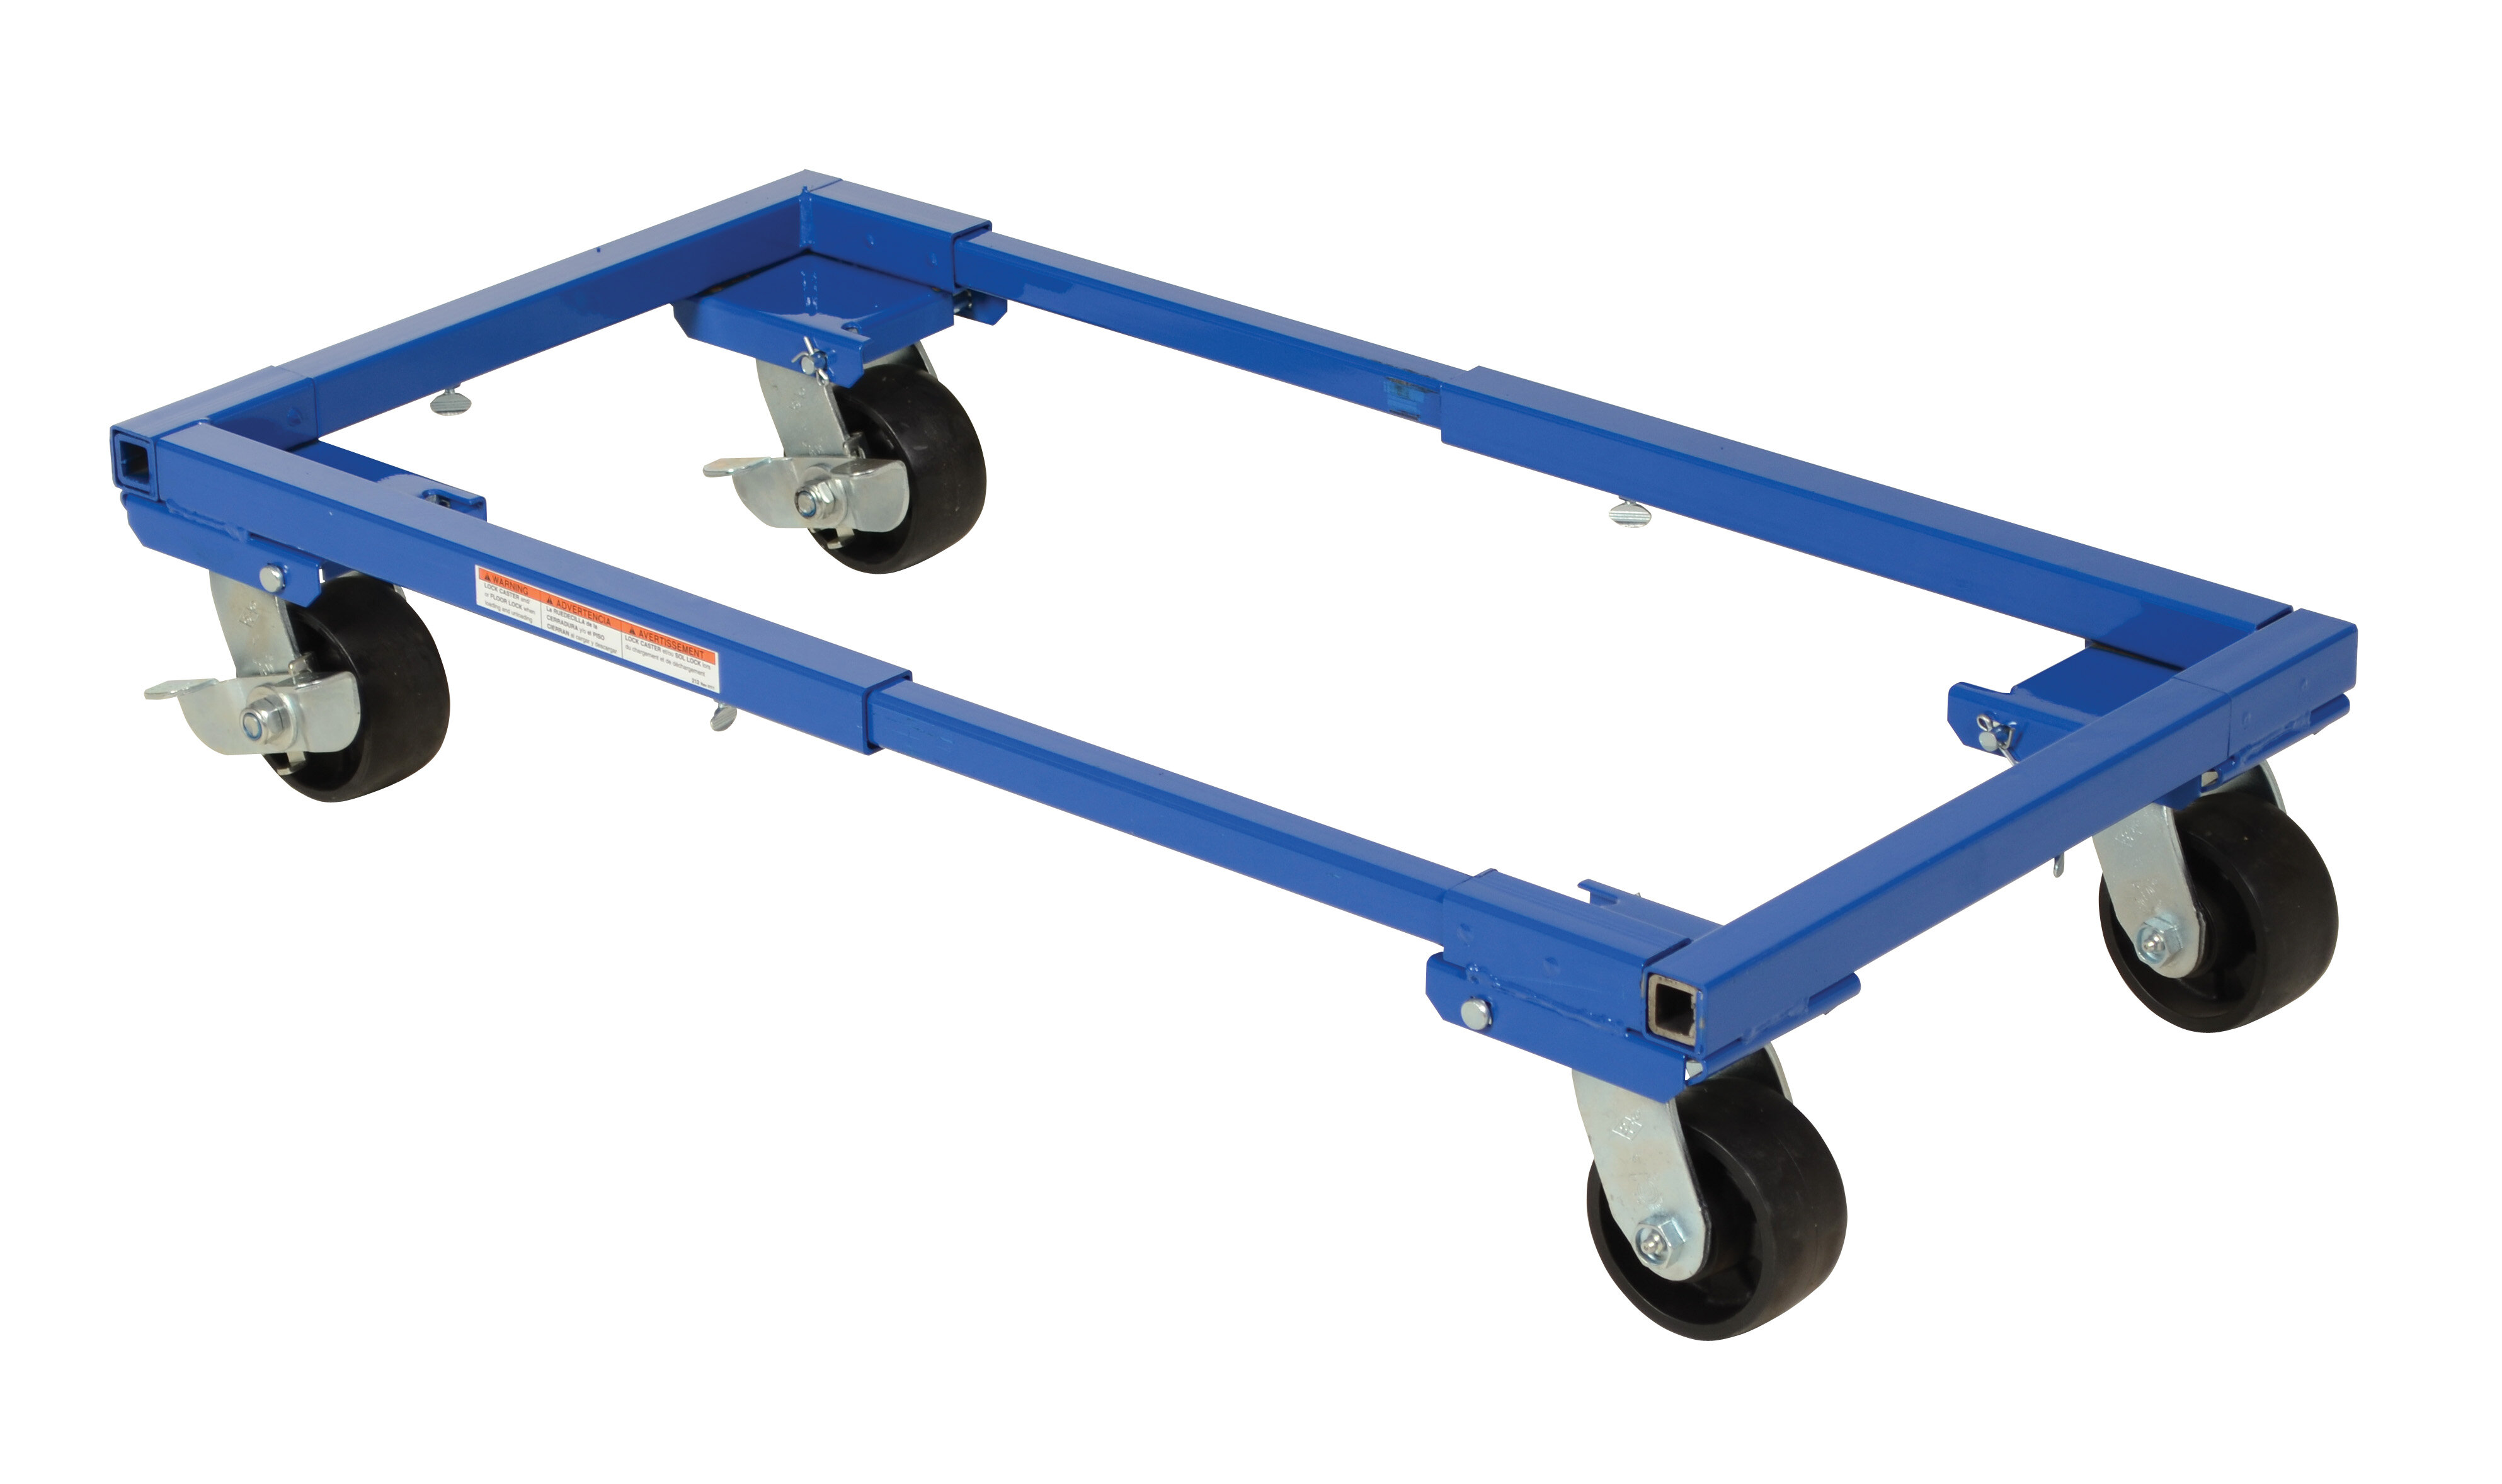 Capacity Rolling Dolly Furniture Dolly Mover Platform With Swivel Caster 200 lb 